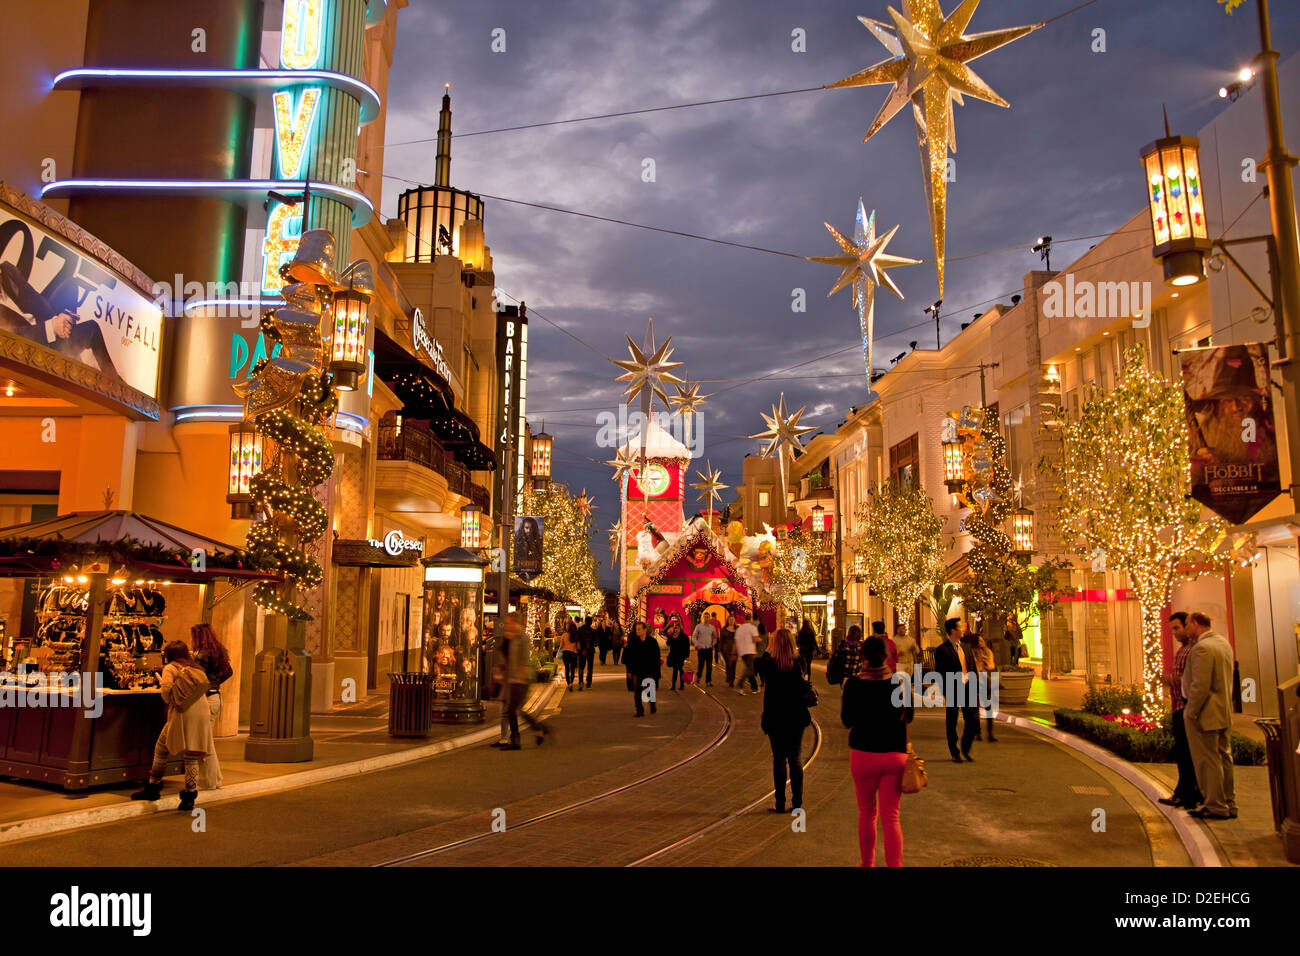  los  angeles  christmas  decorations  www indiepedia org